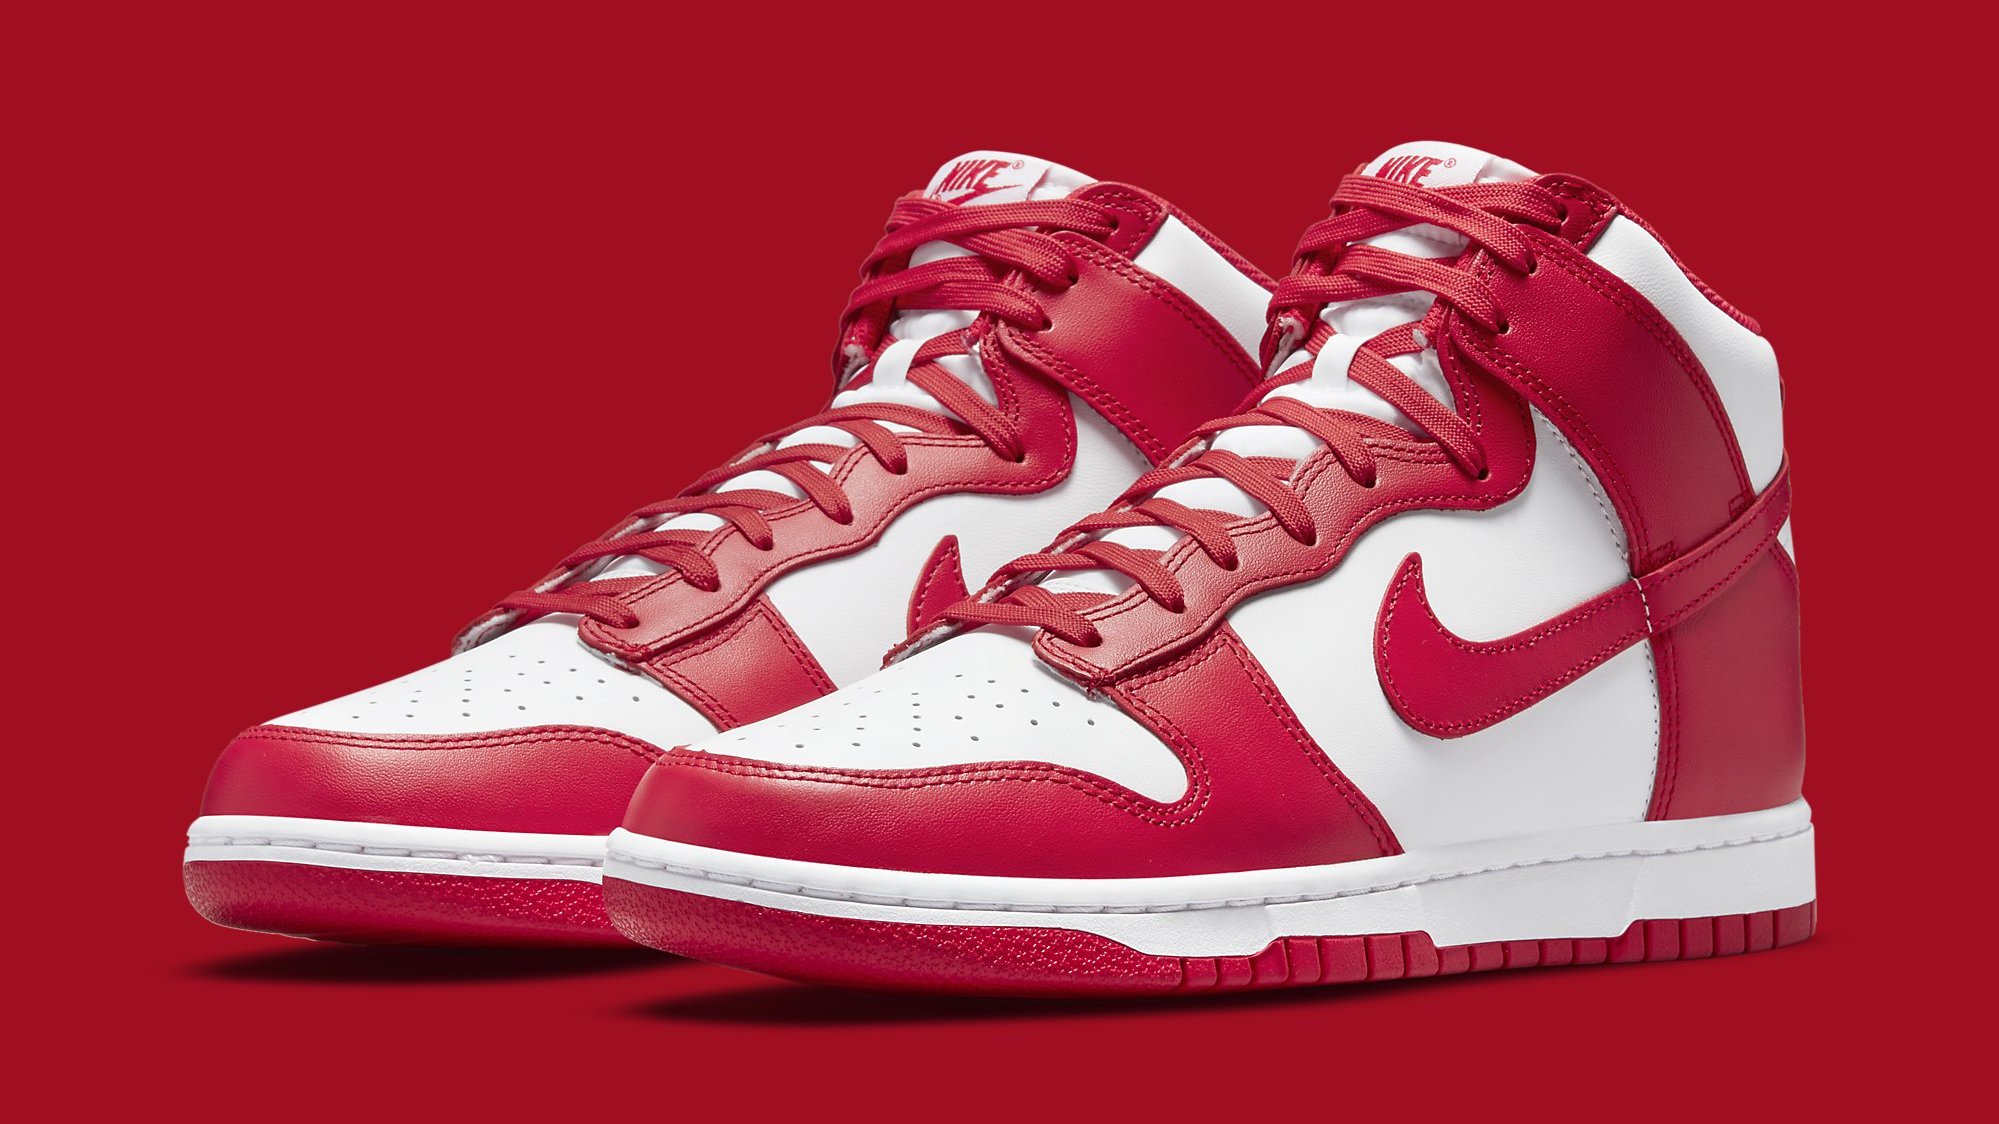 Championship Red' Nike Dunk Highs Get an Official Release Date